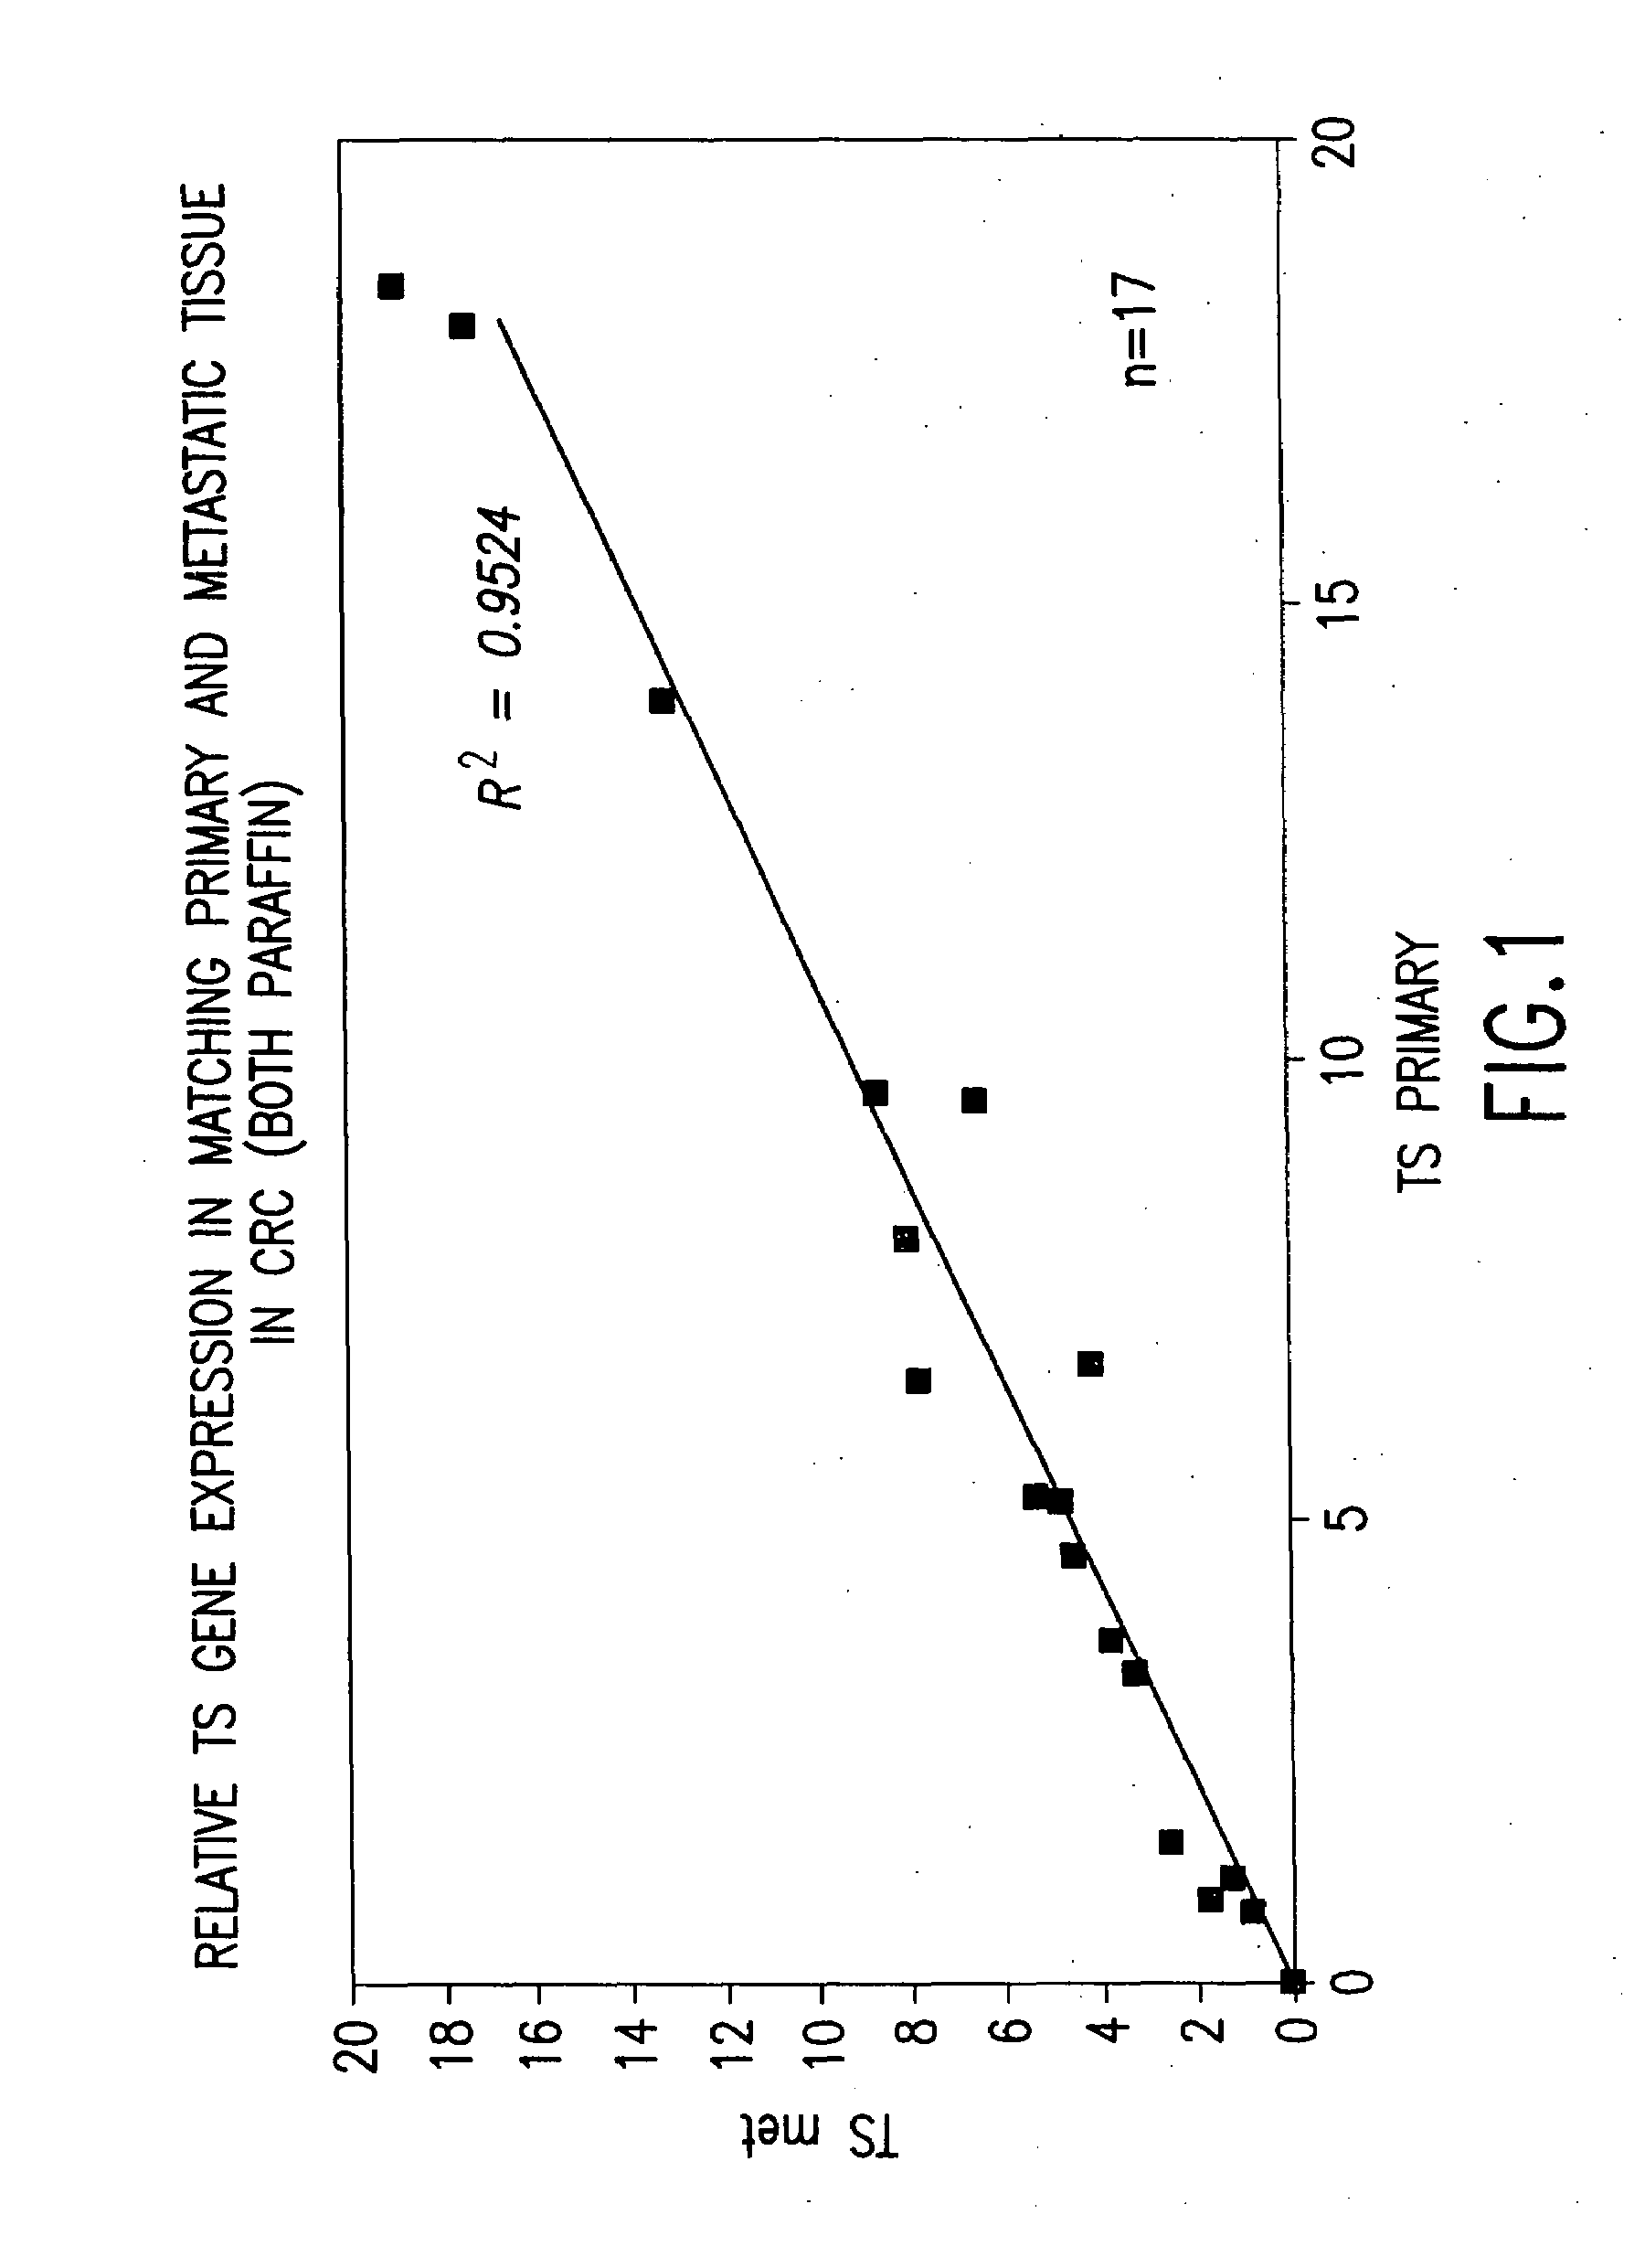 Method of determining a chemotherapeutic regimen by assaying gene expression in primary tumors